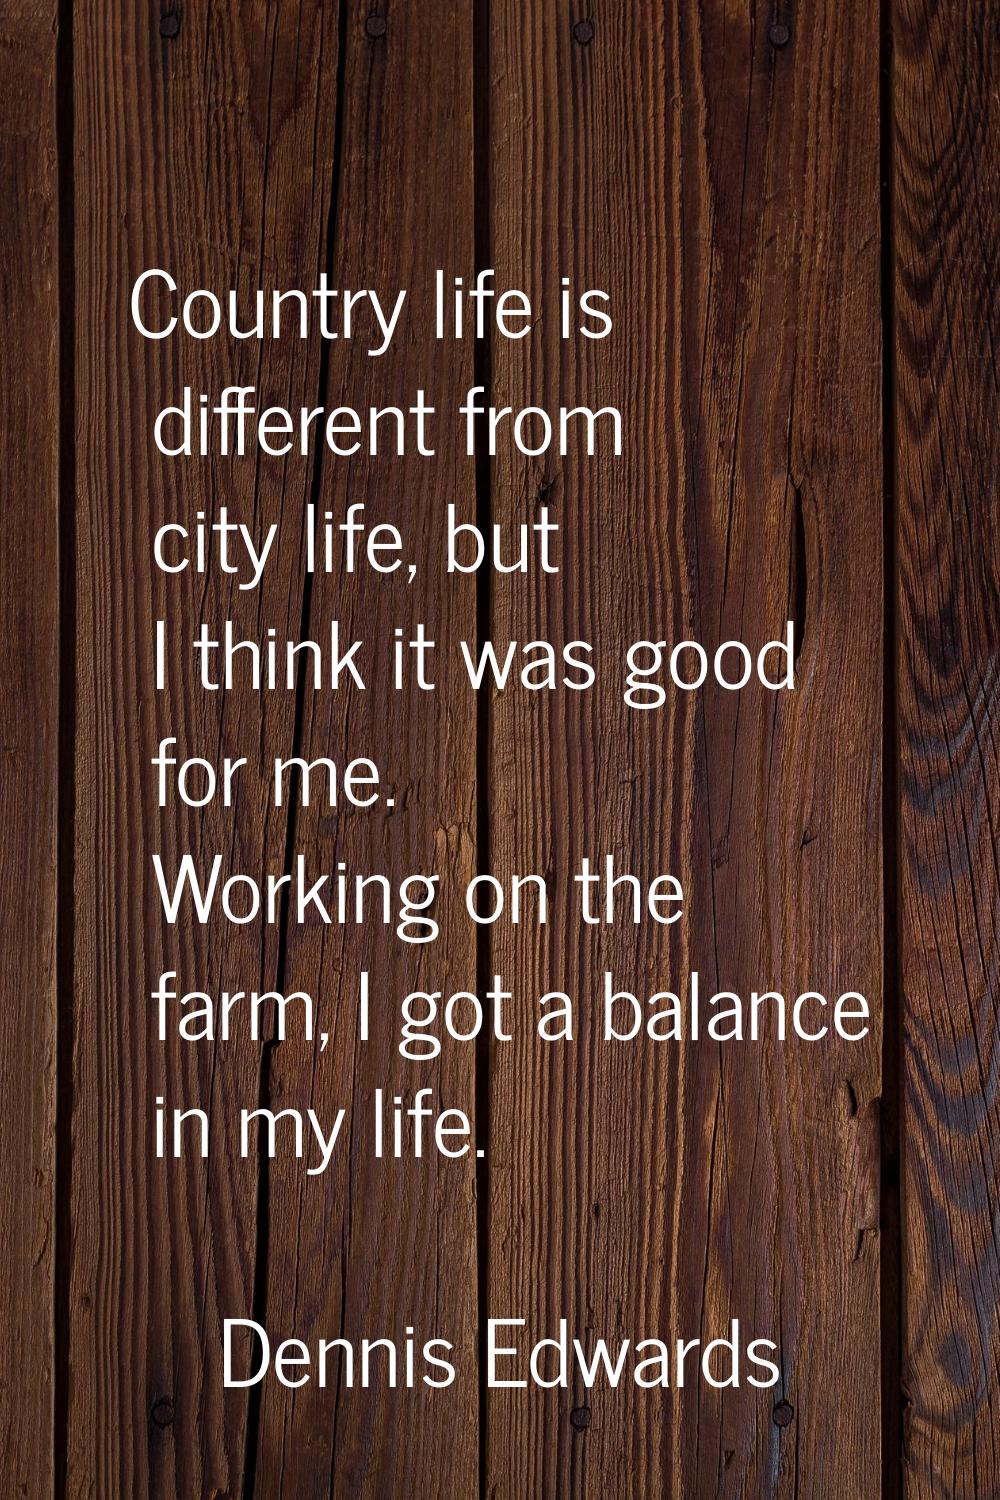 Country life is different from city life, but I think it was good for me. Working on the farm, I go